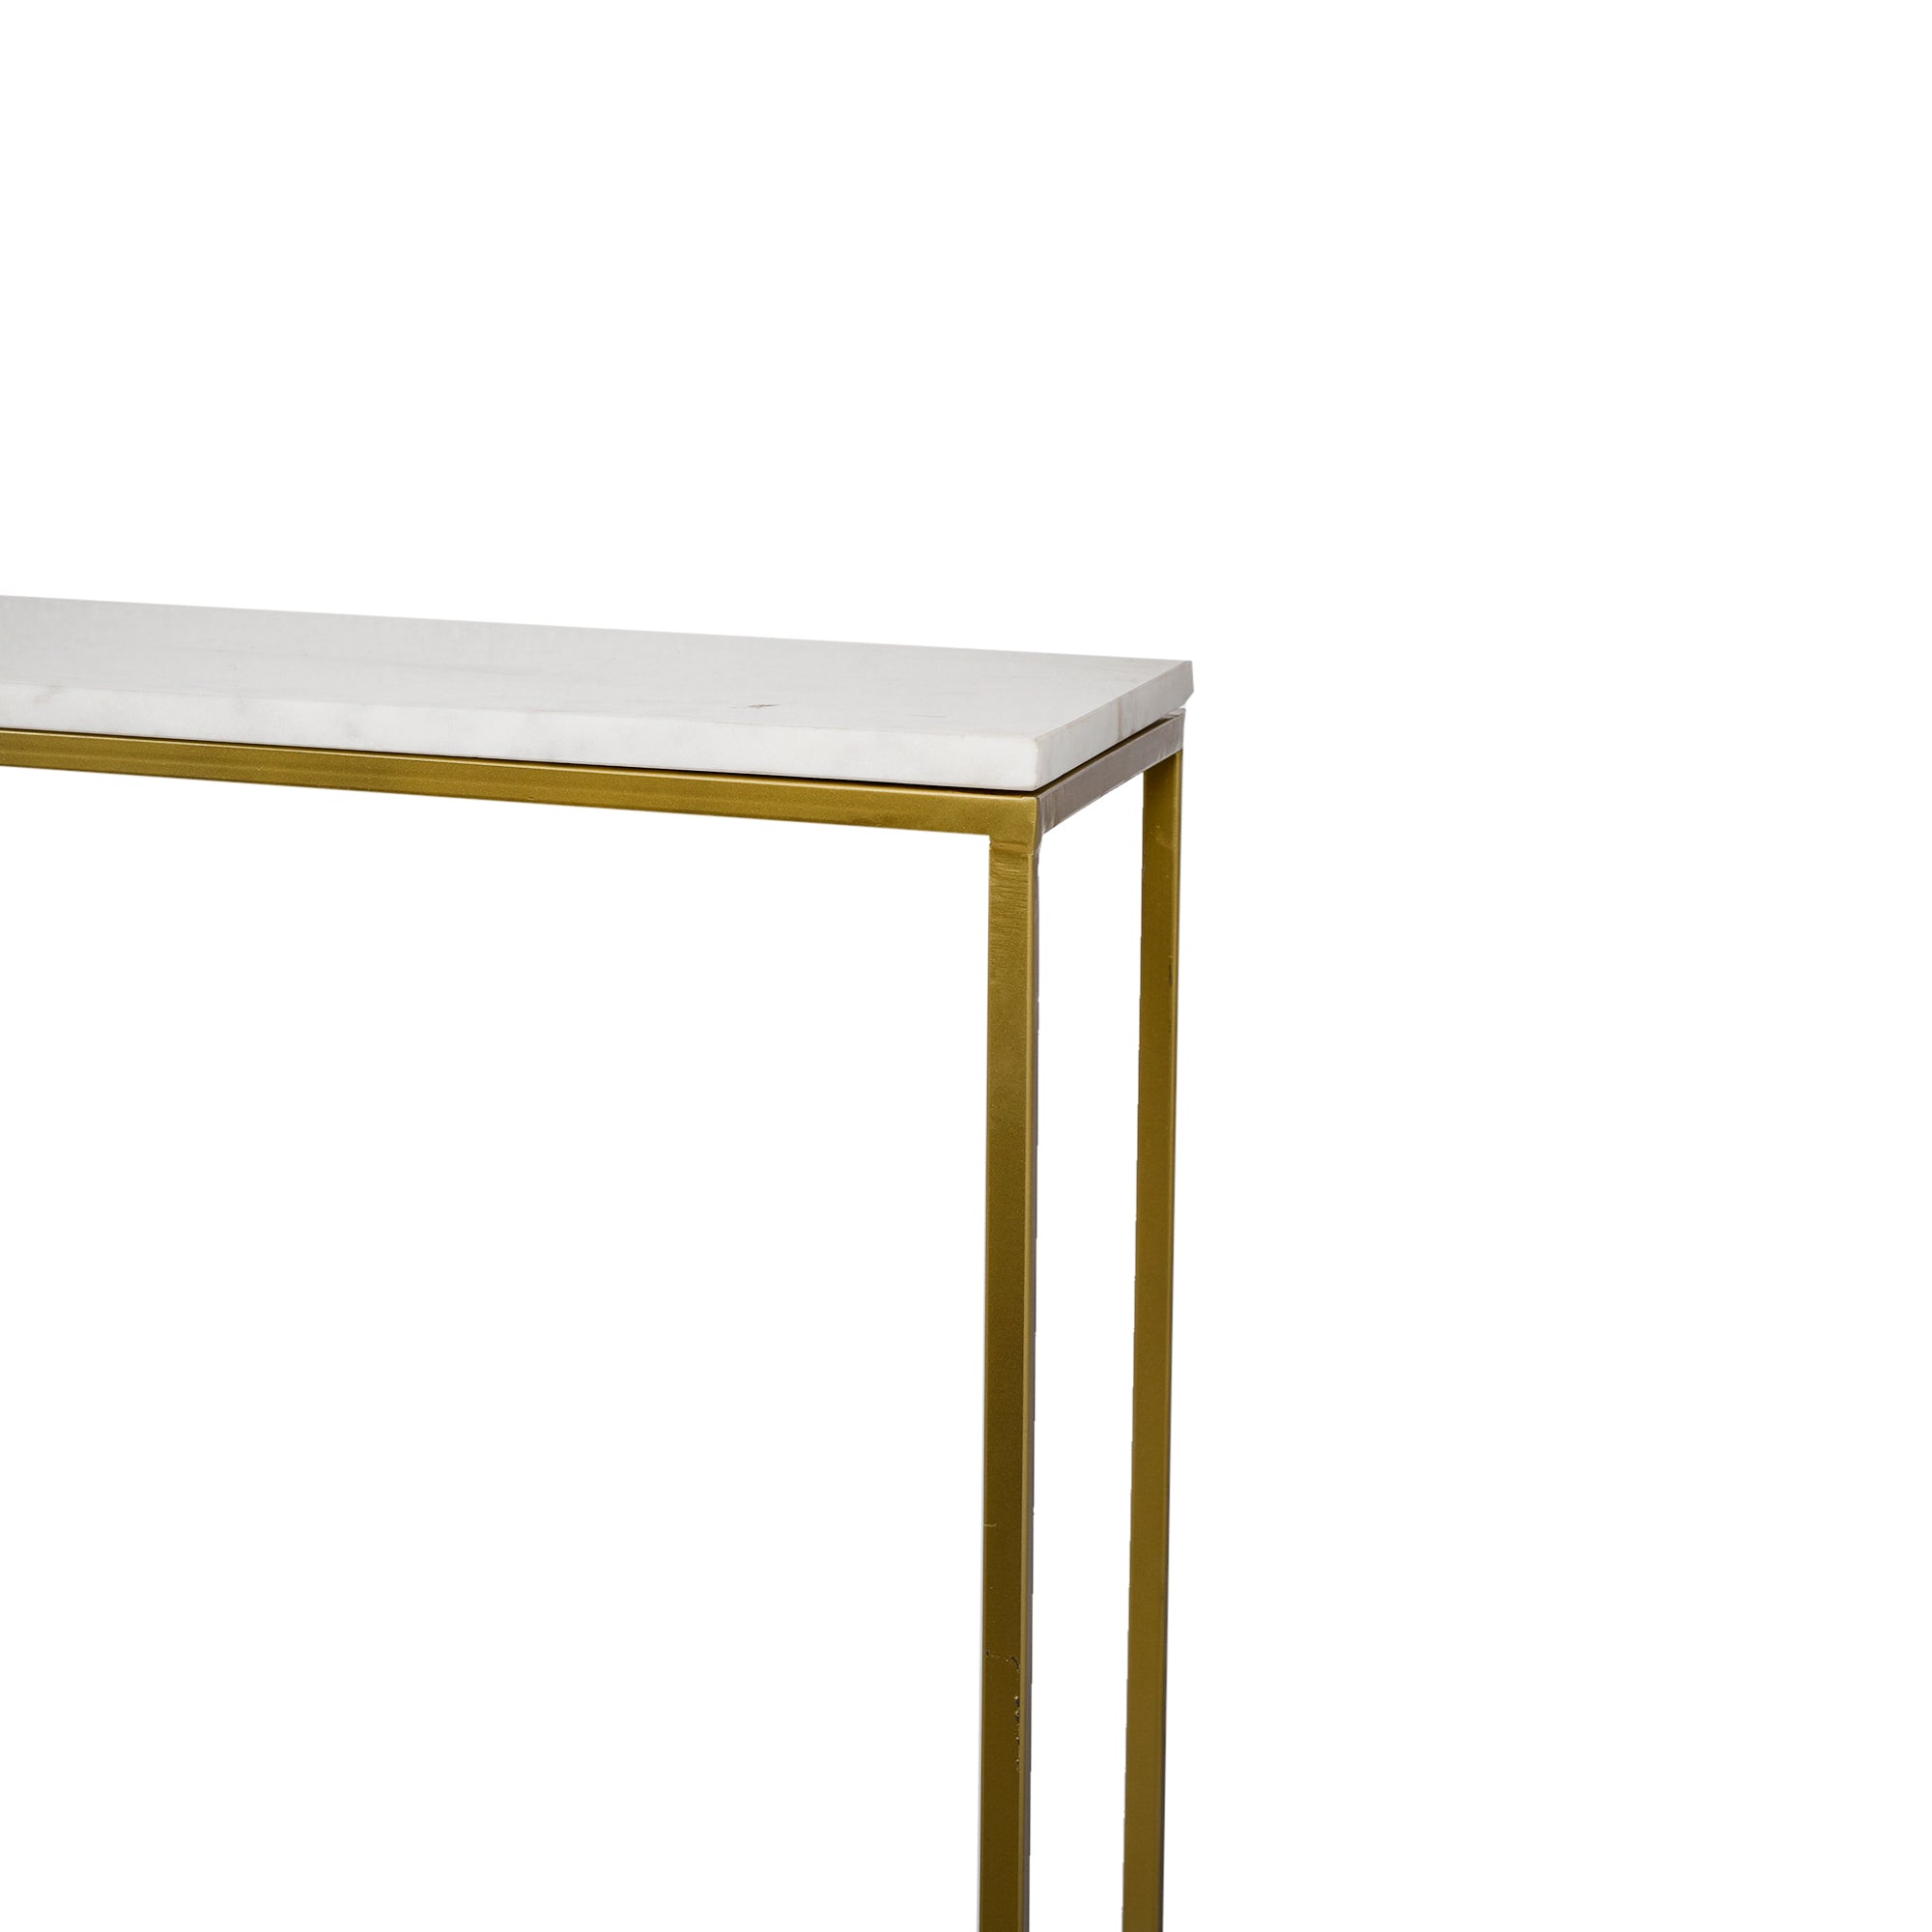 Nested Console Table Set of 2 Marble Top Gold Finish Legs 35 Inches Long